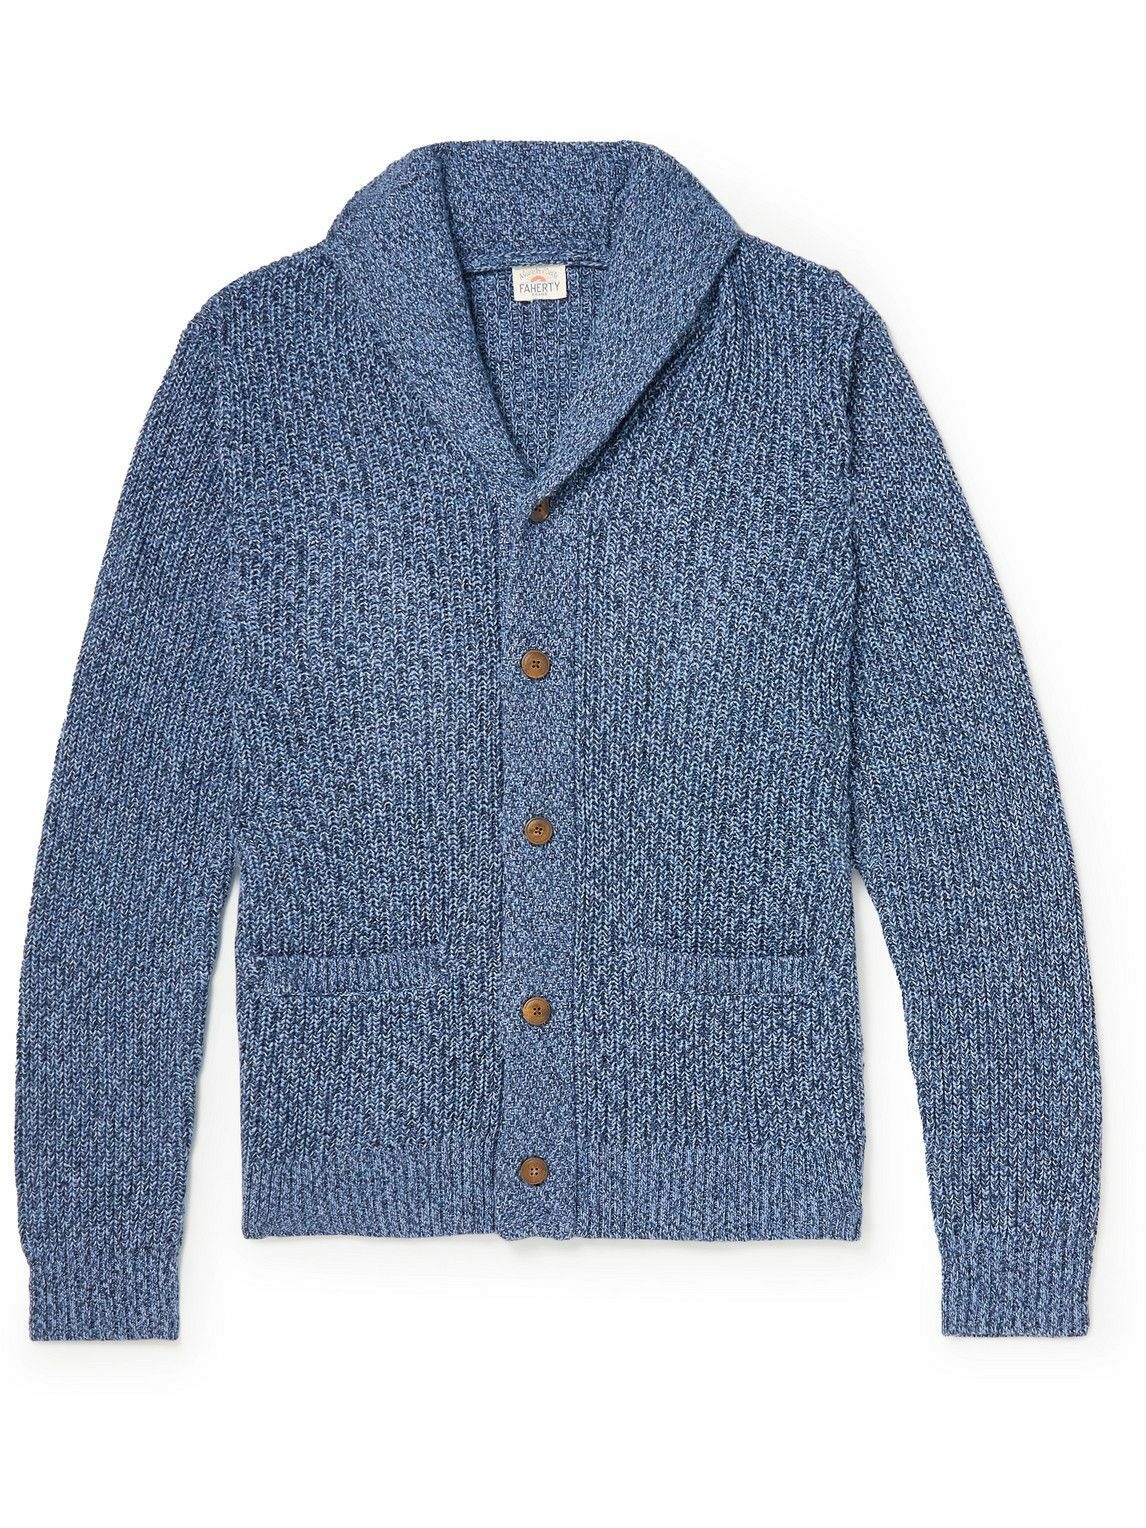 Faherty - Shawl-Collar Cotton and Cashmere-Blend Cardigan - Blue Faherty